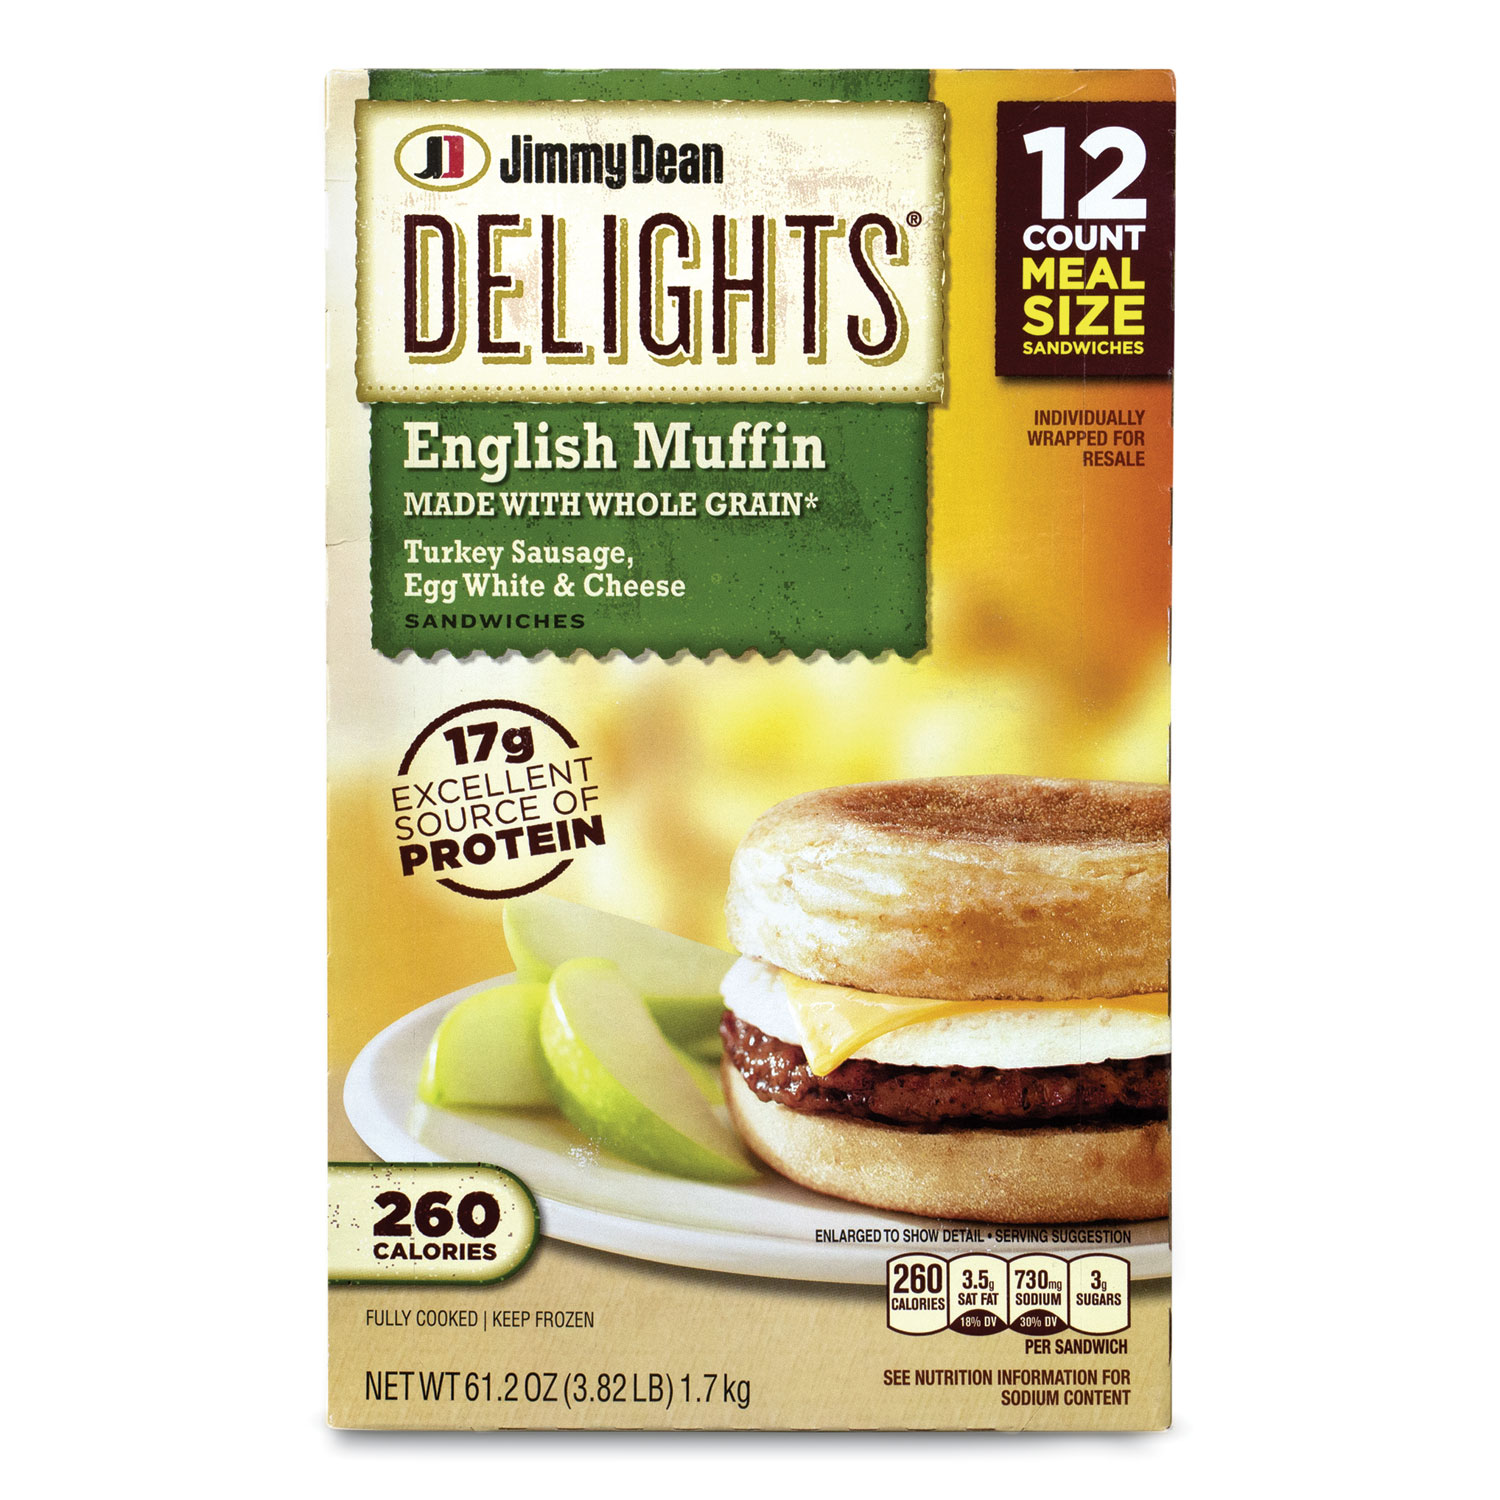  Jimmy Dean 31099 Delights English Muffin, Turkey Sausage, Egg White and Cheese, 61.2 oz Box, 12/Box, Free Delivery in 1-4 Business Days (GRR90300011) 